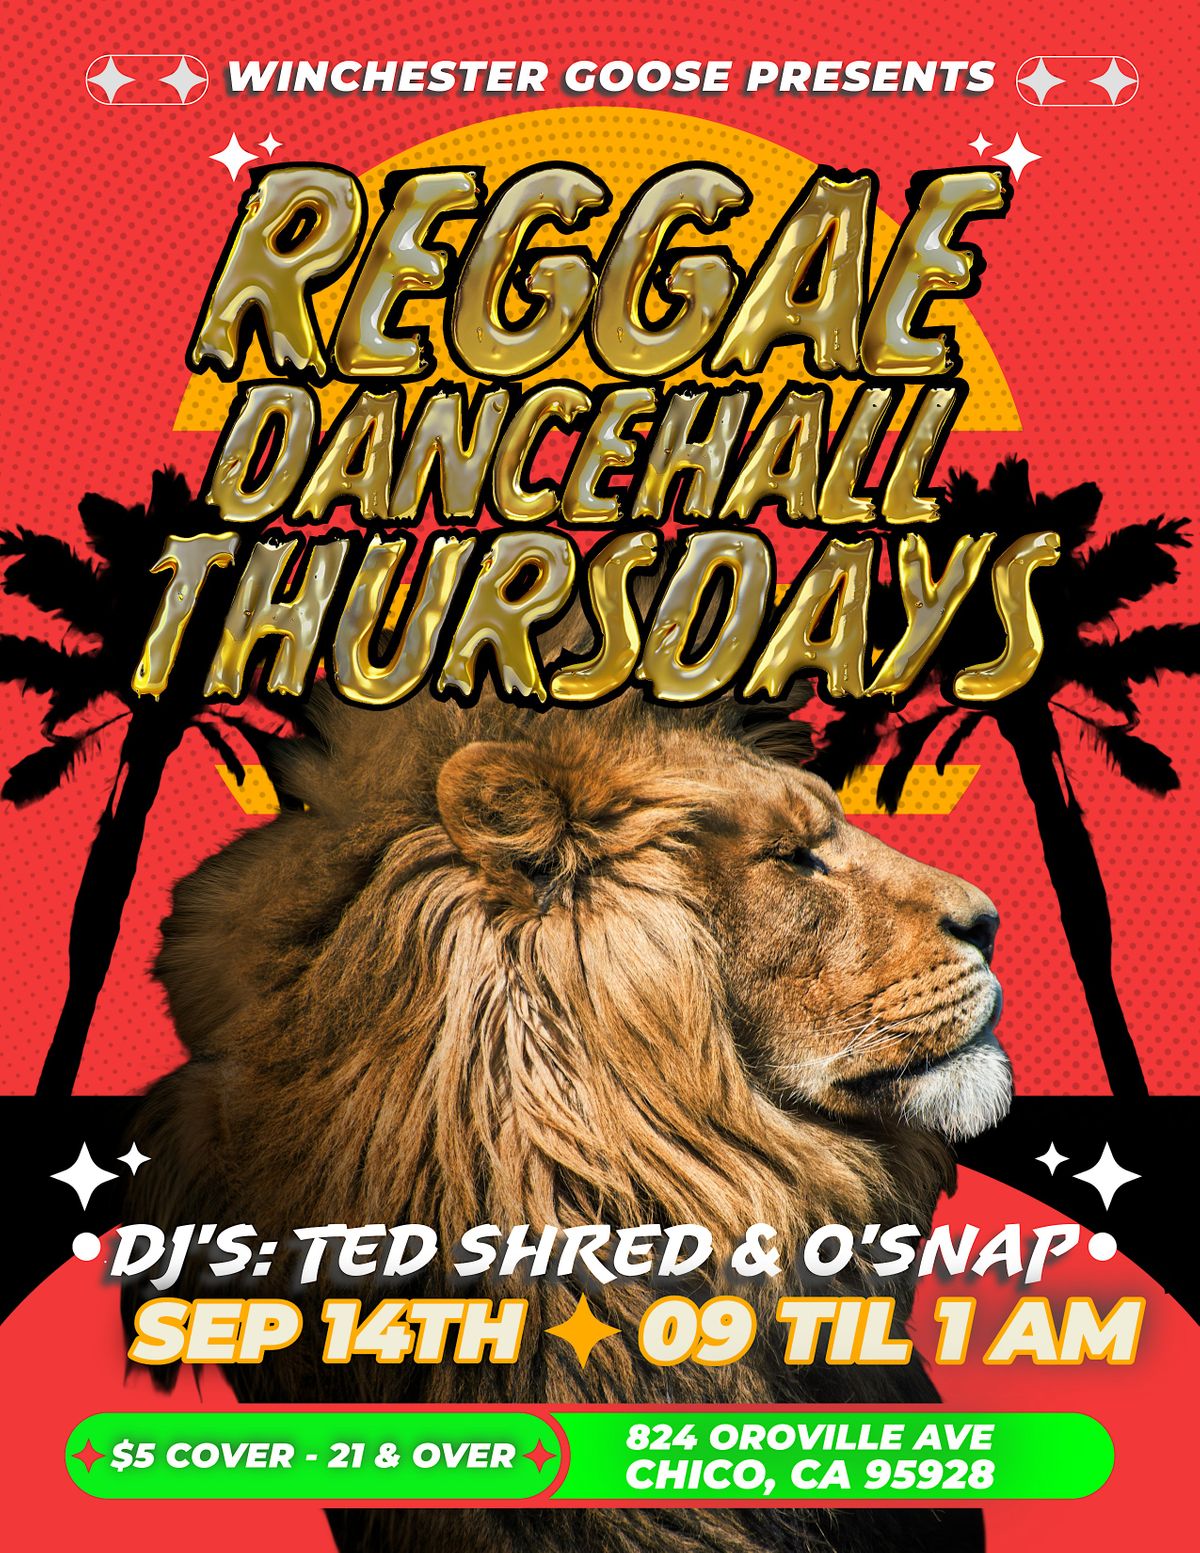 Reggae Night with Ted Shred and Dj O'Snap